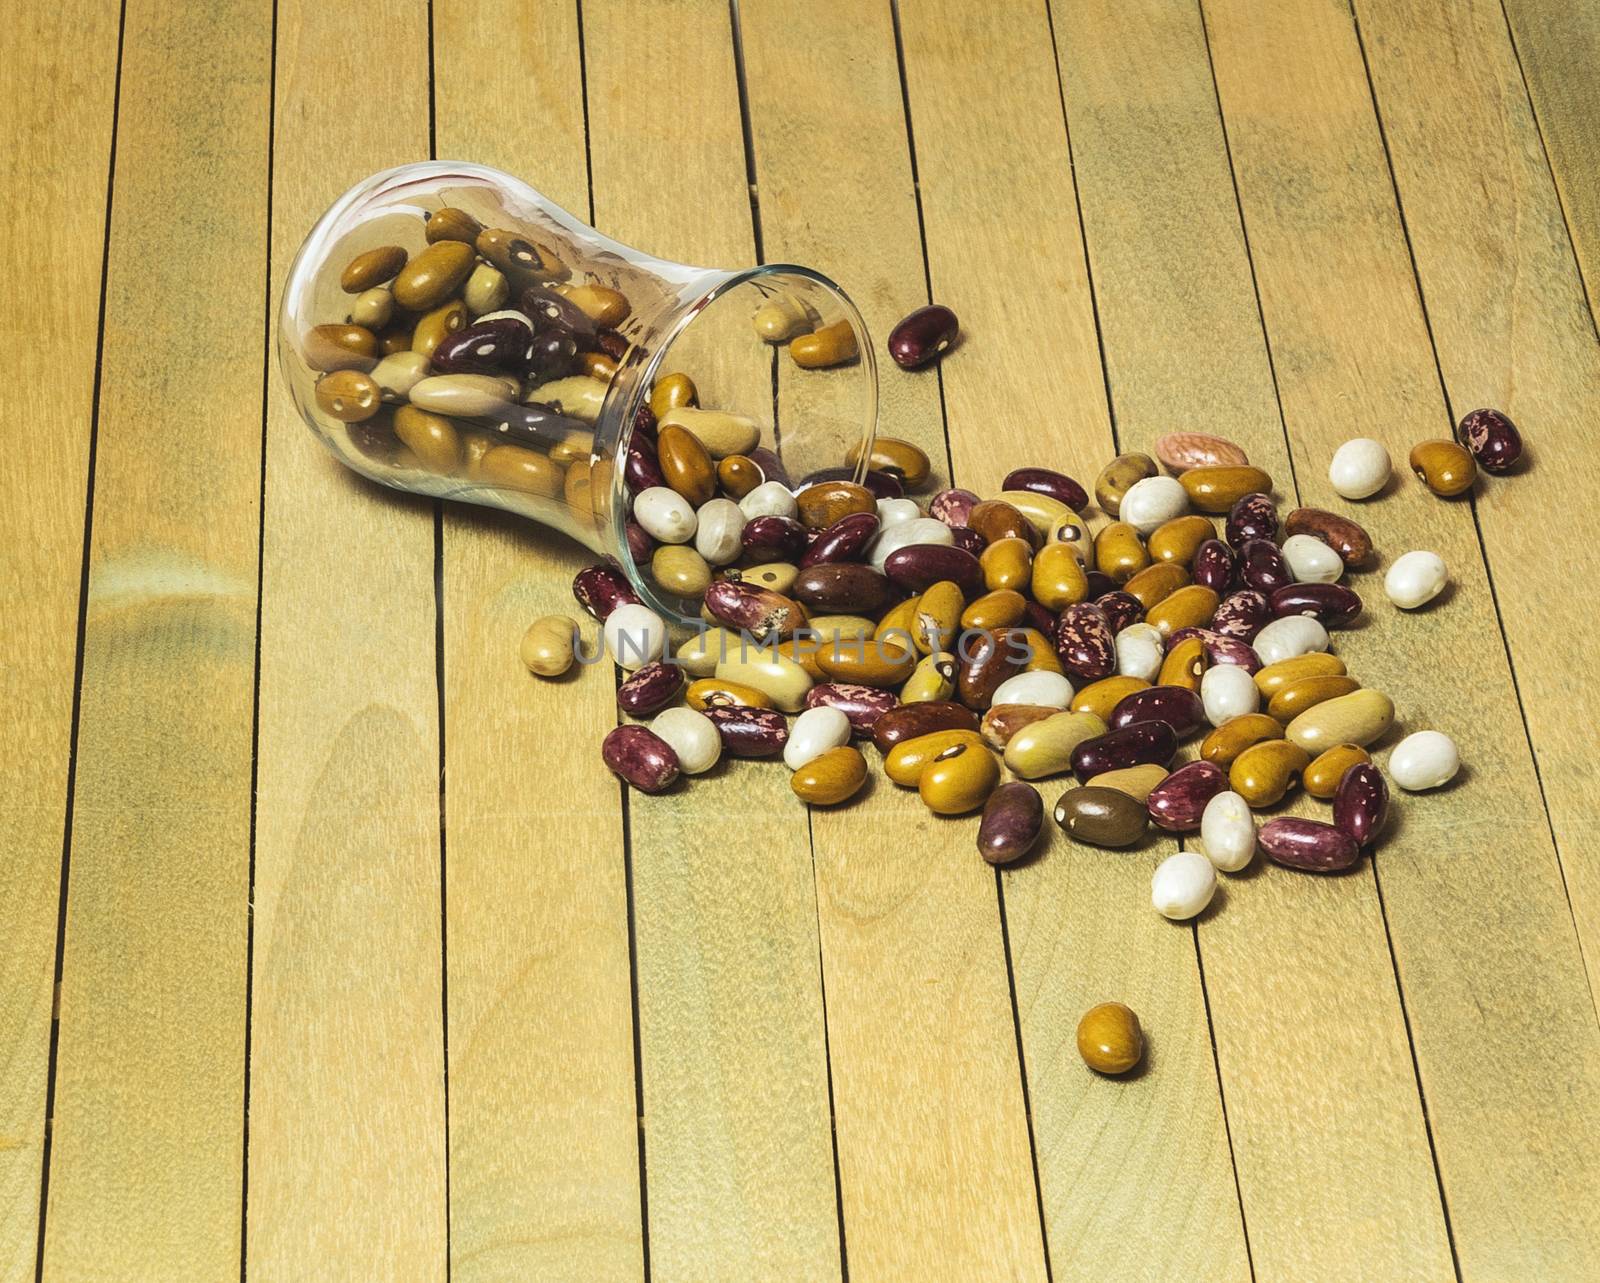 Beans beans spilled from a glass container on a wooden surface by Grommik